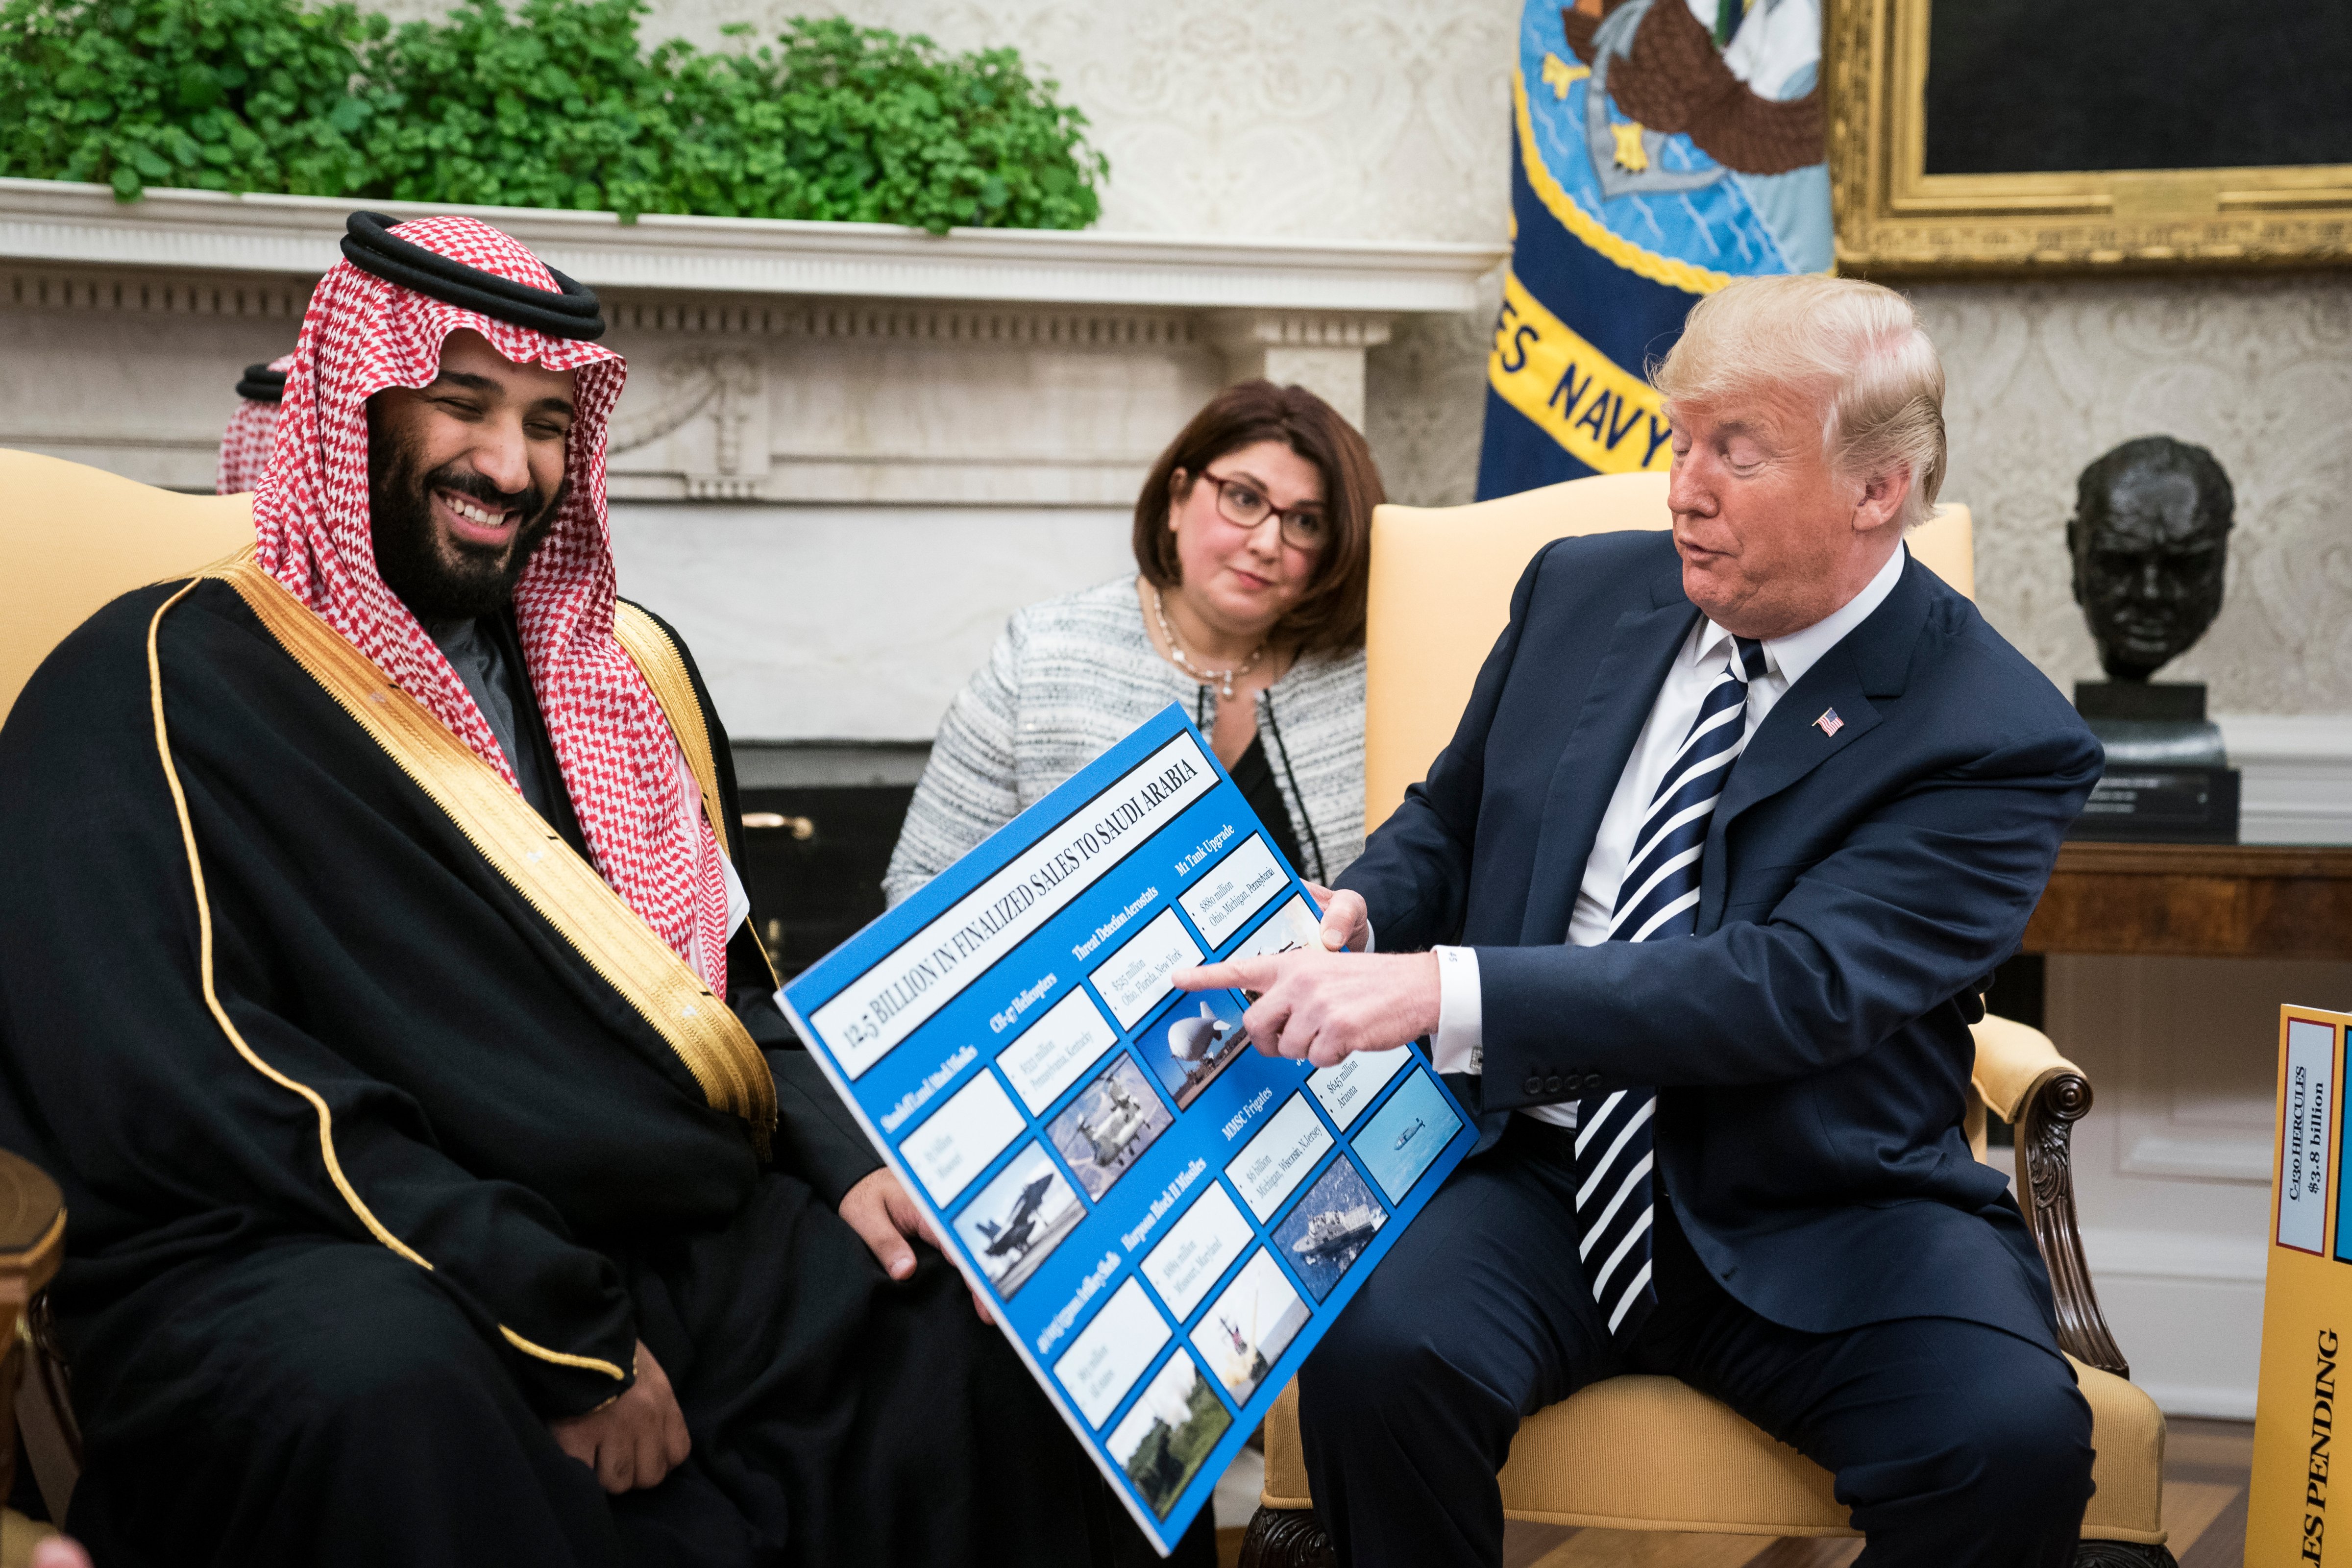 President Donald Trump shows off posters as he talks with Saudi Crown Prince Mohammad bin Salman in the Oval Office of the White House on March 20, 2018 in Washington, DC. (Jabin Botsford—The Washington Post/Getty Images)